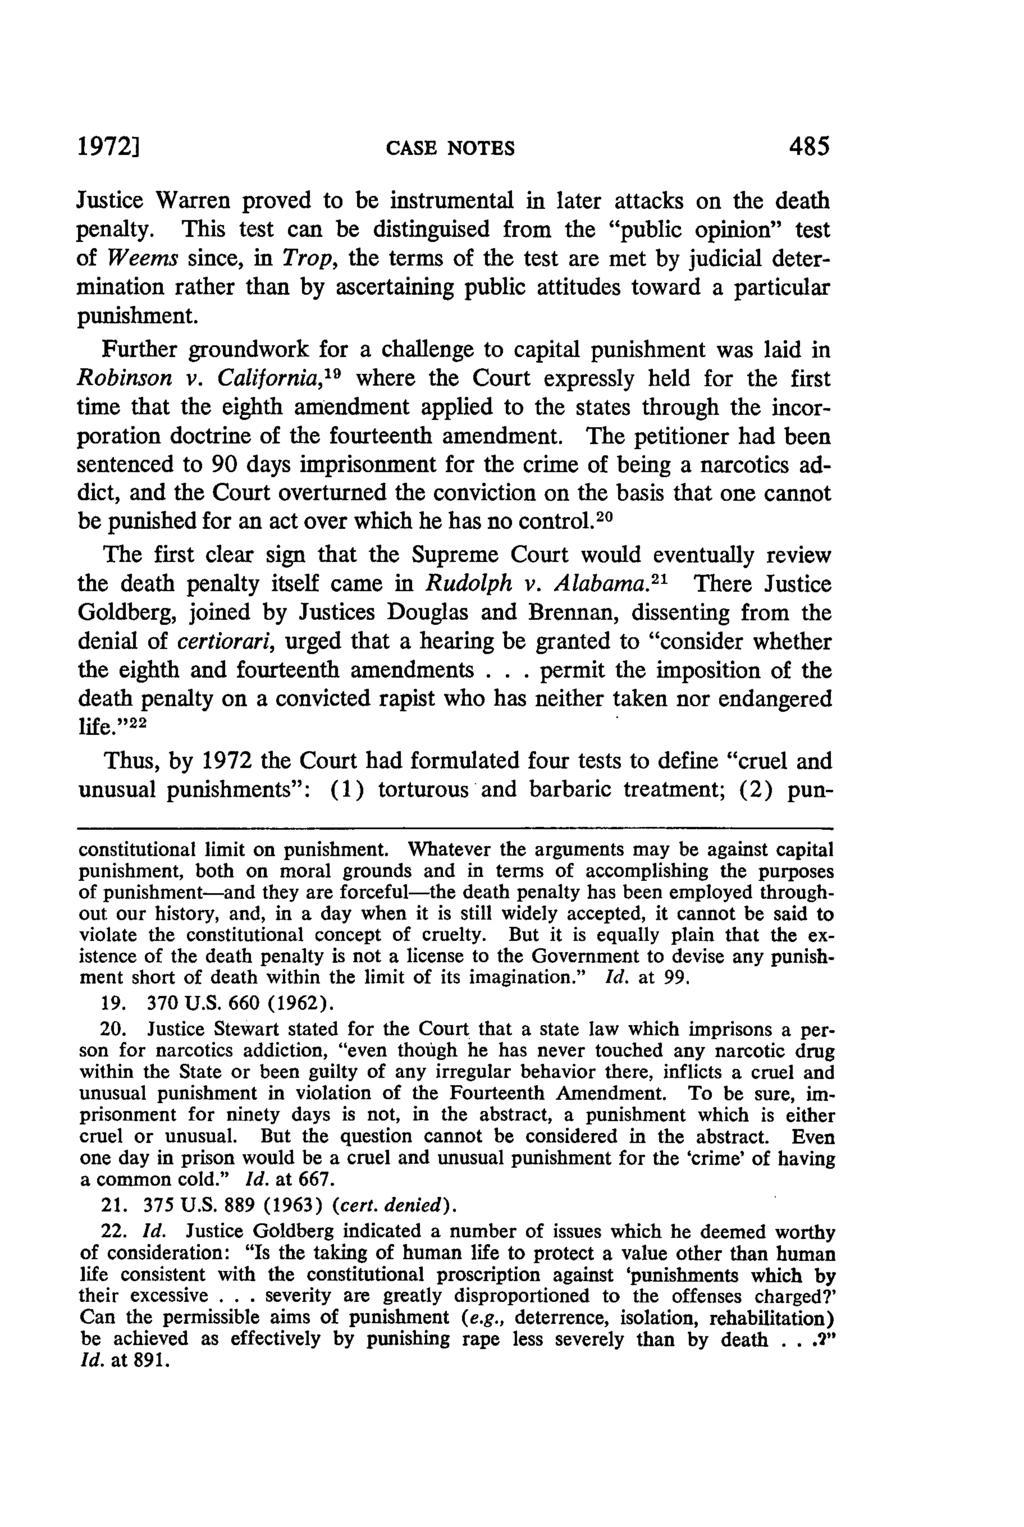 19721 CASE NOTES 485 Justice Warren proved to be instrumental in later attacks on the death penalty.